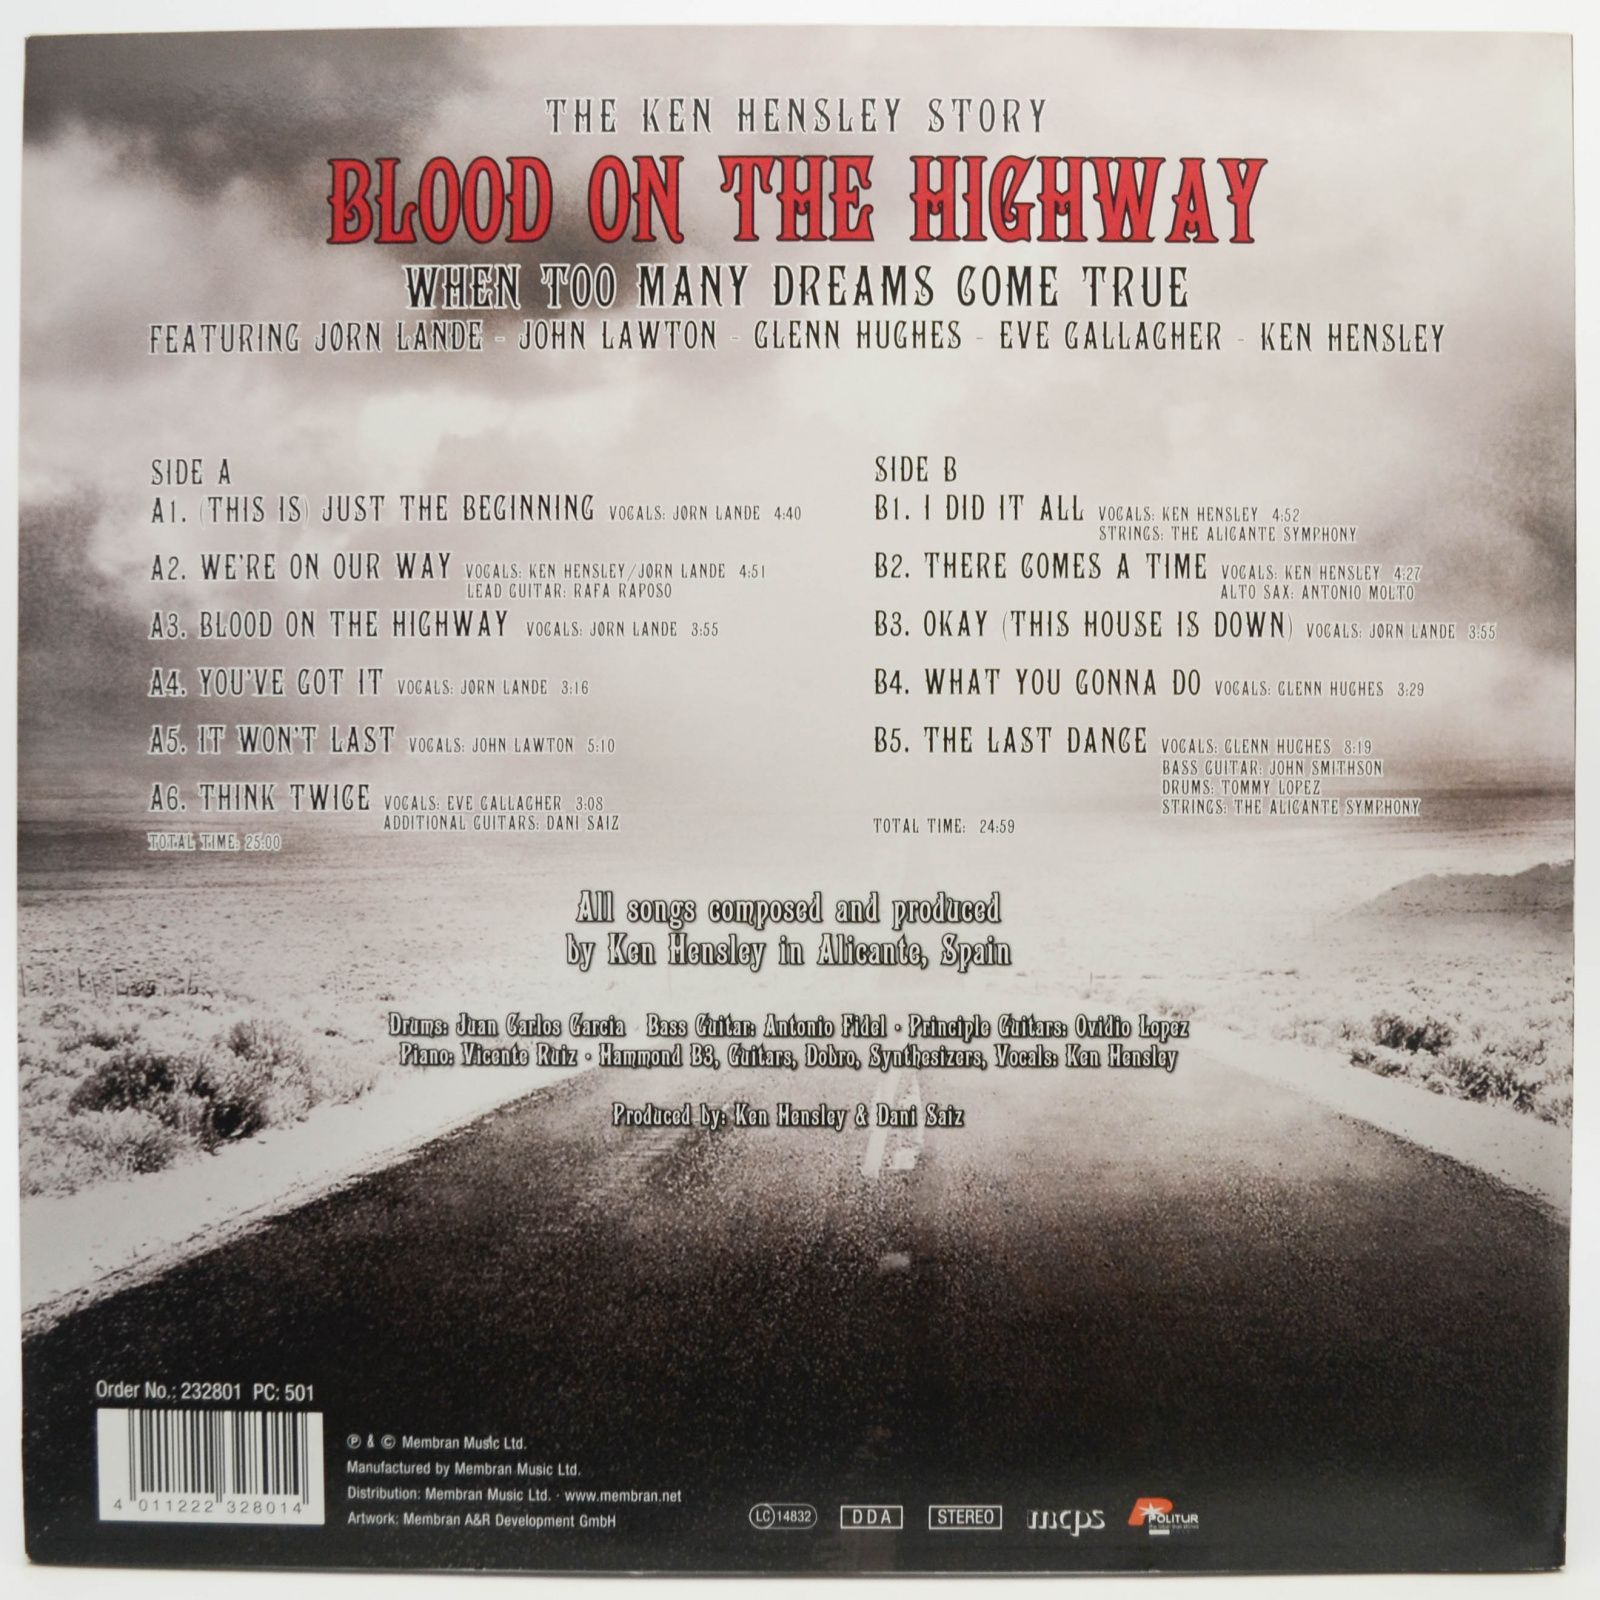 Ken Hensley — Blood On The Highway (The Ken Hensley Story - When Too Many Dreams Come True), 2007